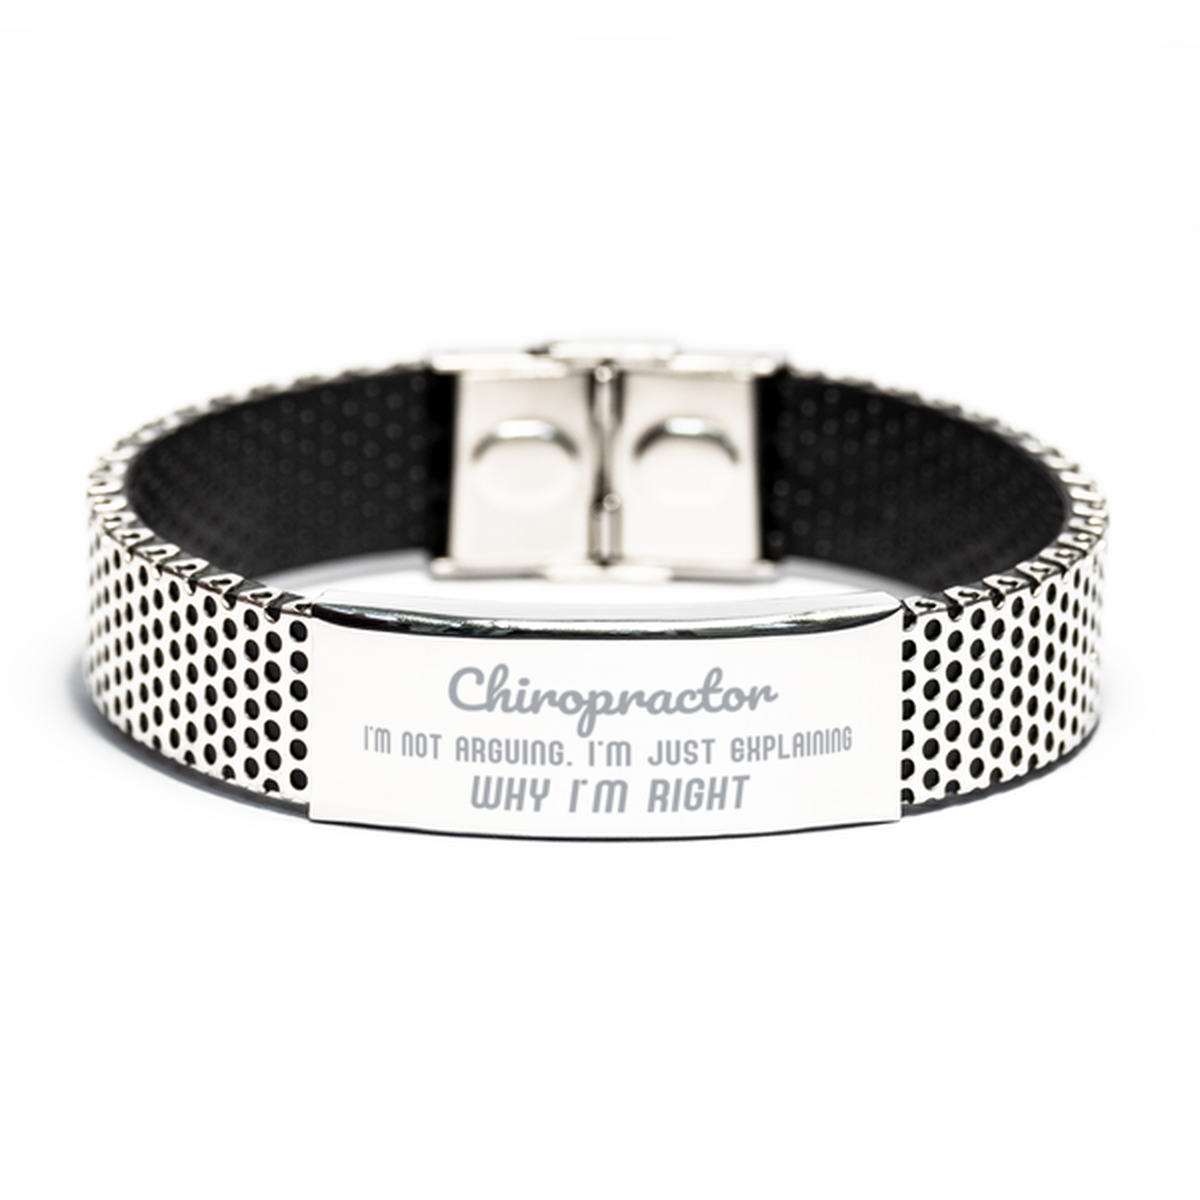 Chiropractor I'm not Arguing. I'm Just Explaining Why I'm RIGHT Stainless Steel Bracelet, Funny Saying Quote Chiropractor Gifts For Chiropractor Graduation Birthday Christmas Gifts for Men Women Coworker